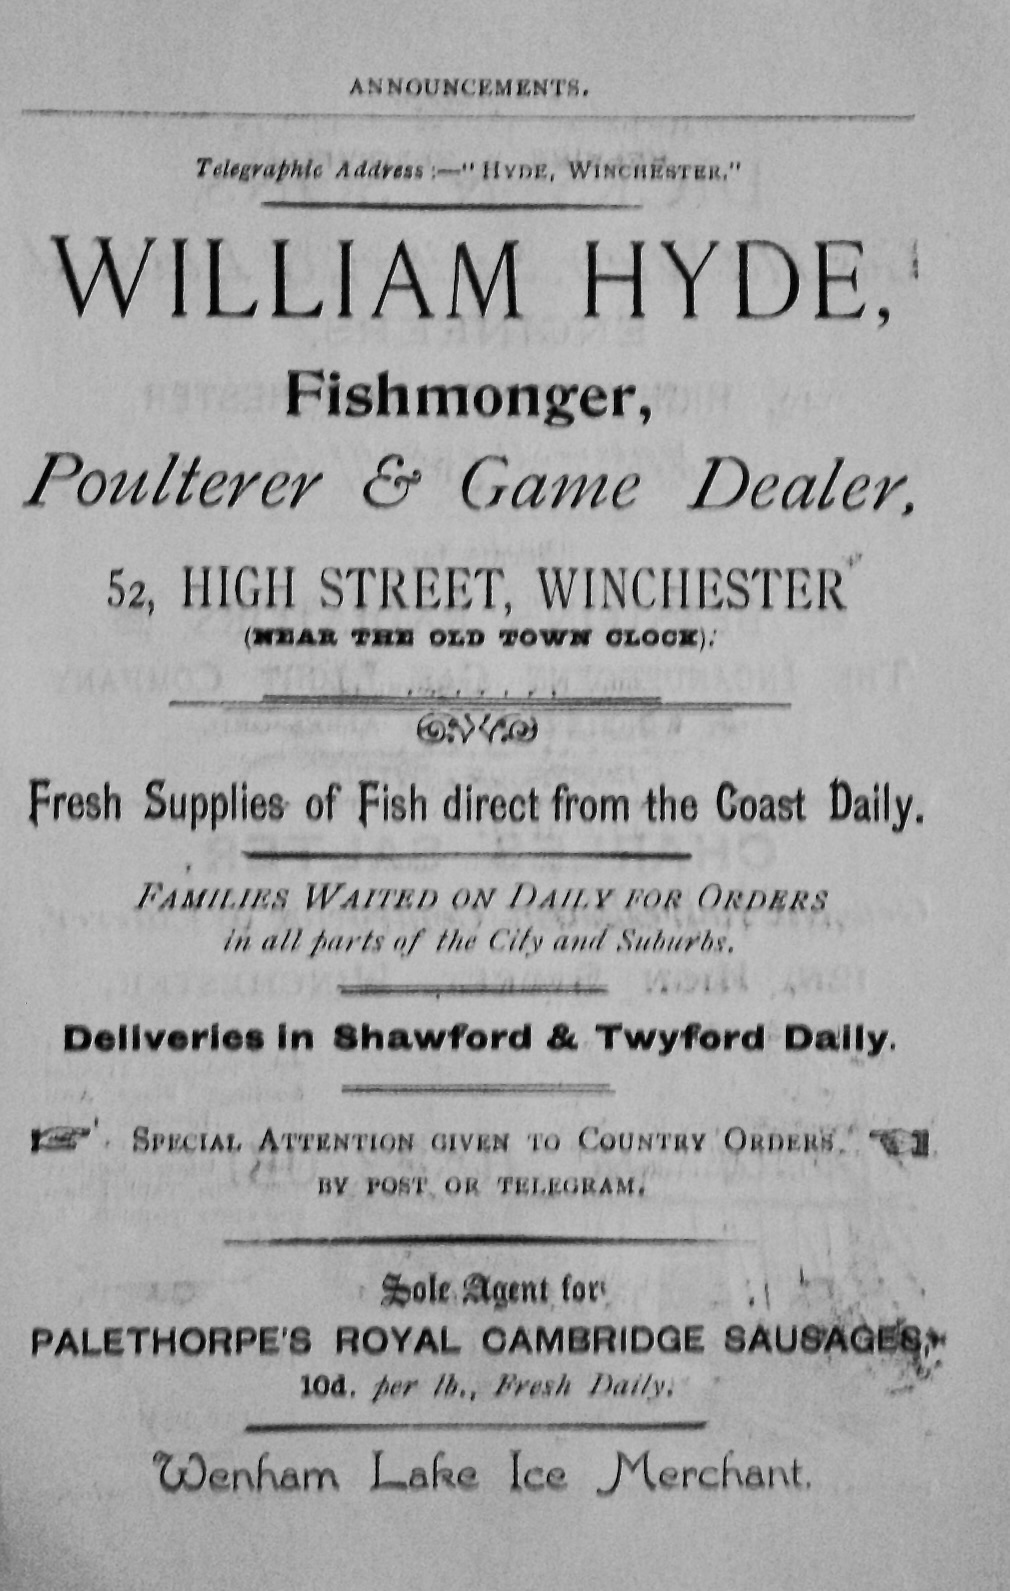 William Hyde, Fishmonger, Poulterer & Game Dealer, 52, High Street, Winches